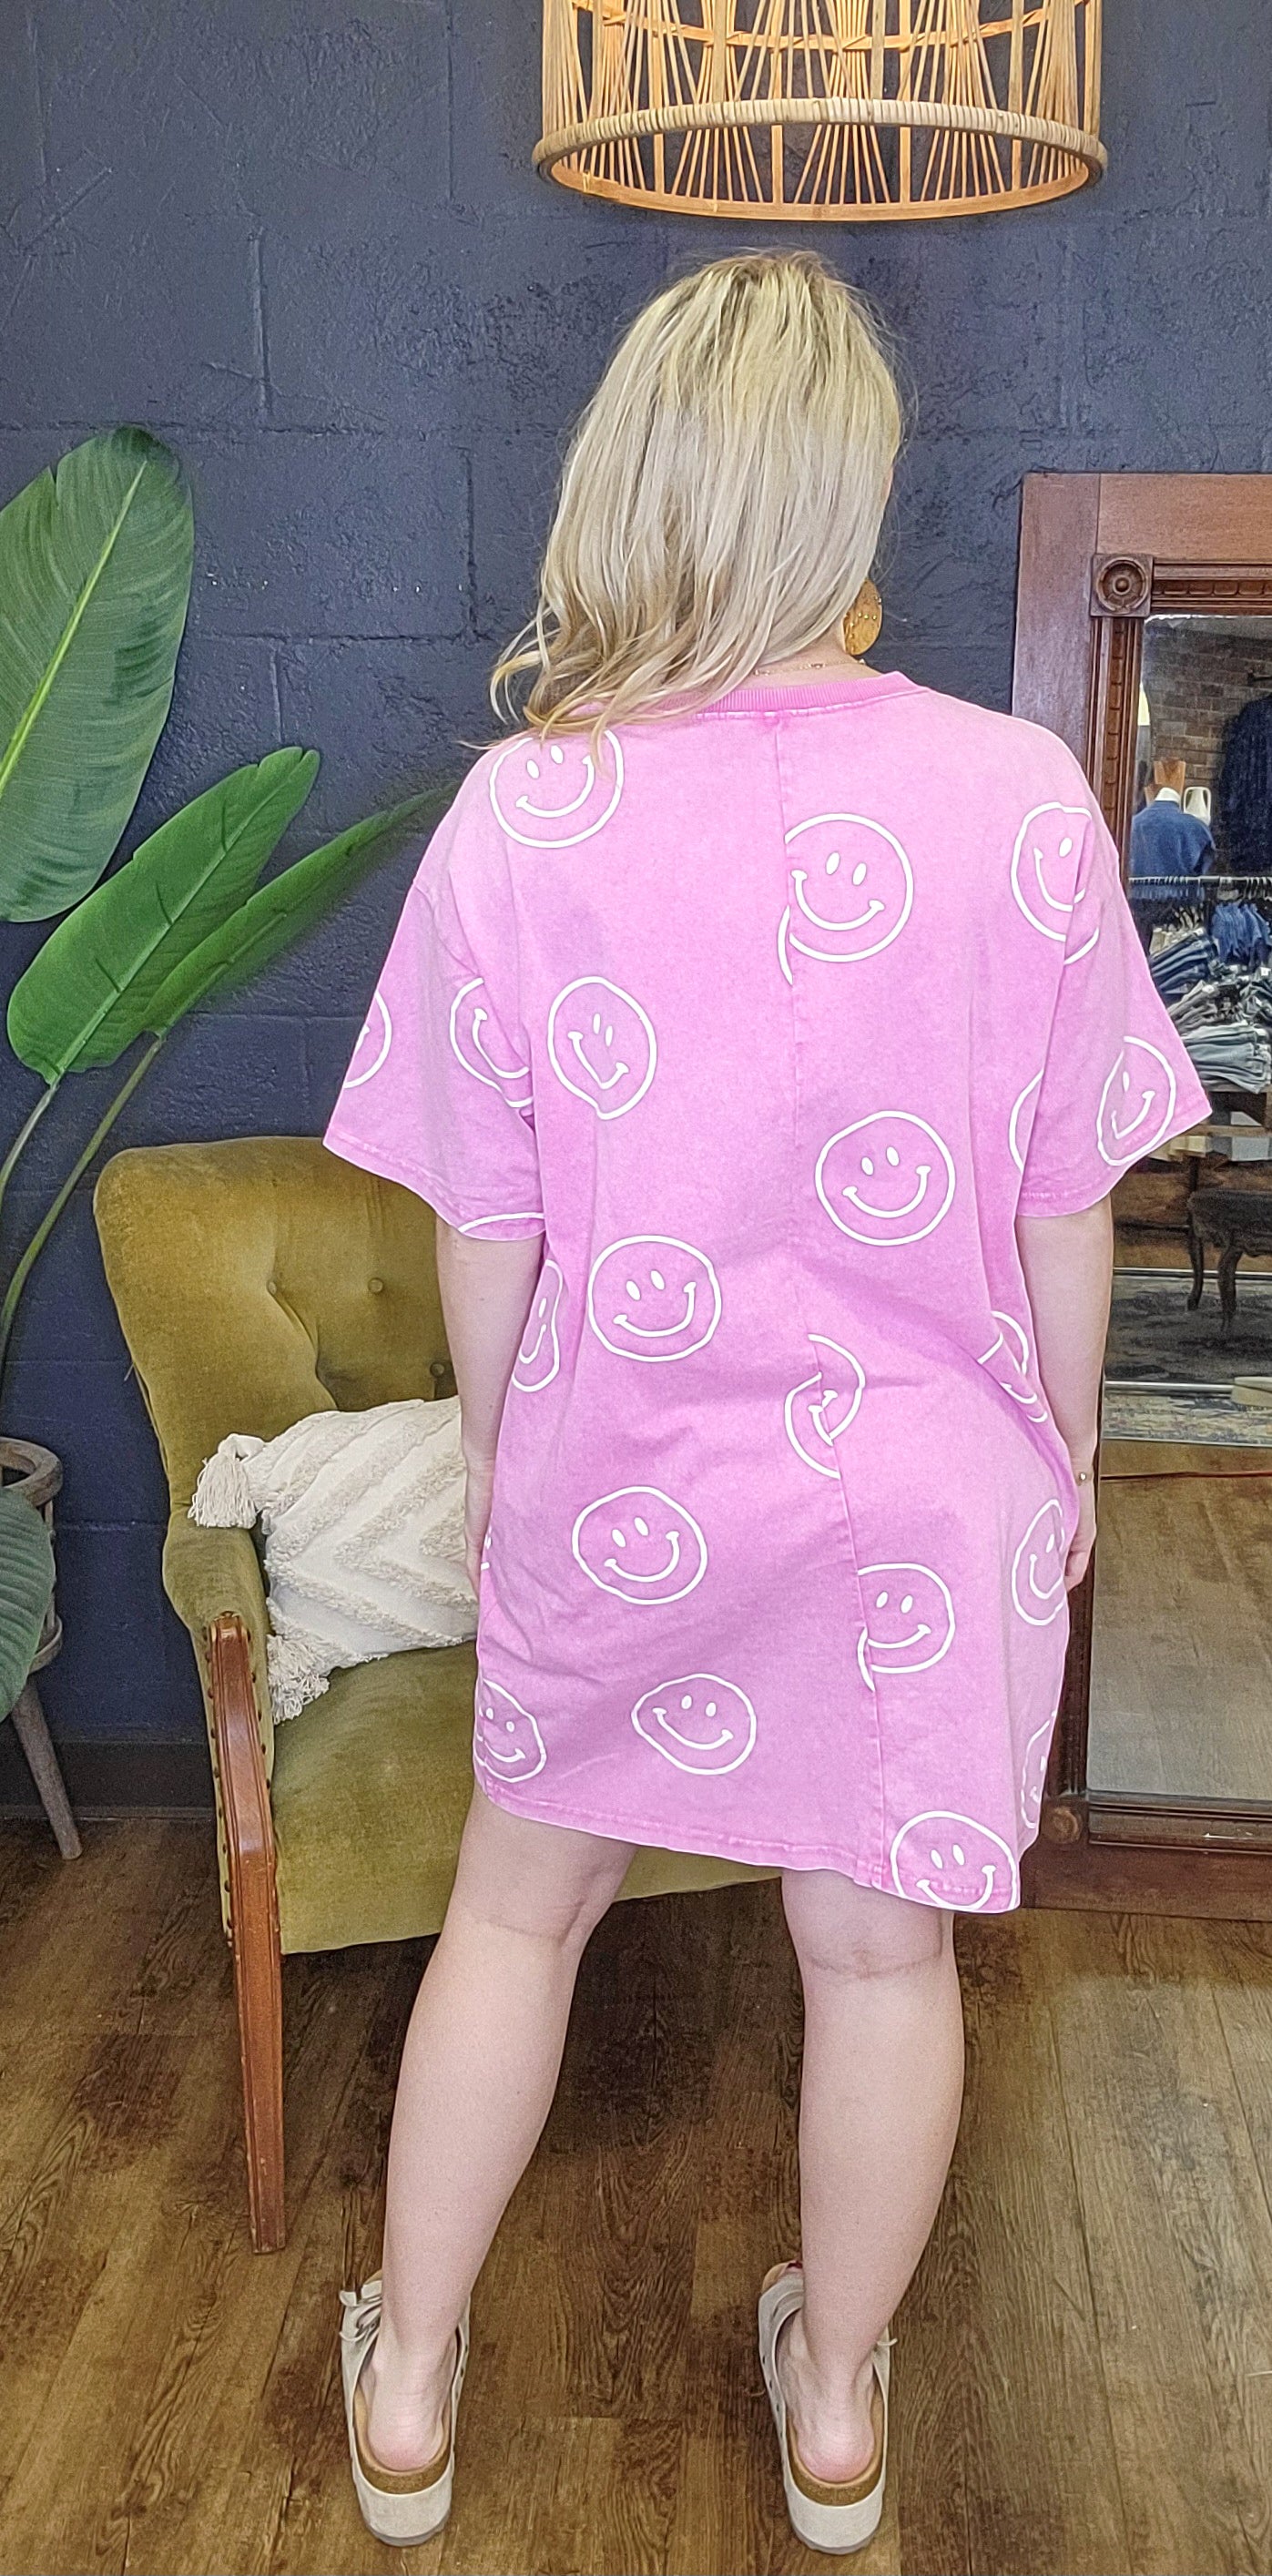 Smiles for Days Tunic Dress (Small to Large)